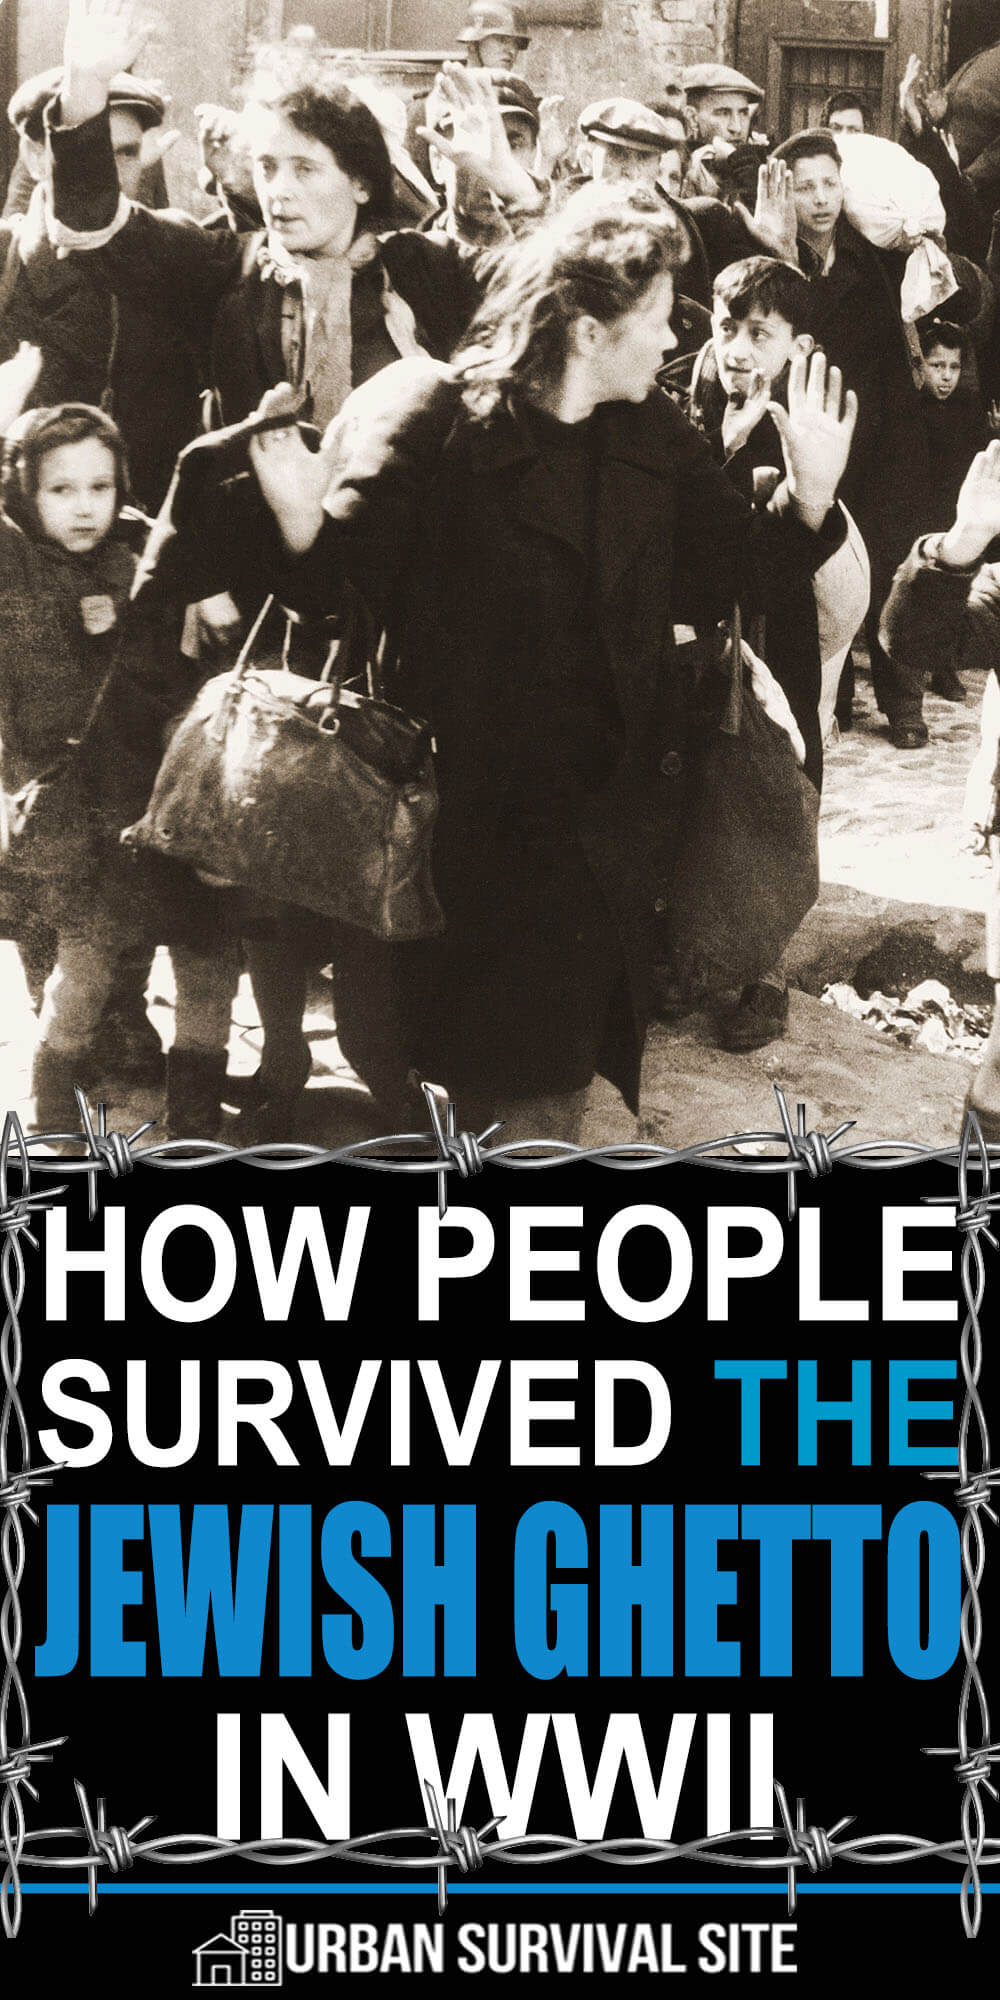 How People Survived The Jewish Ghetto in WWII